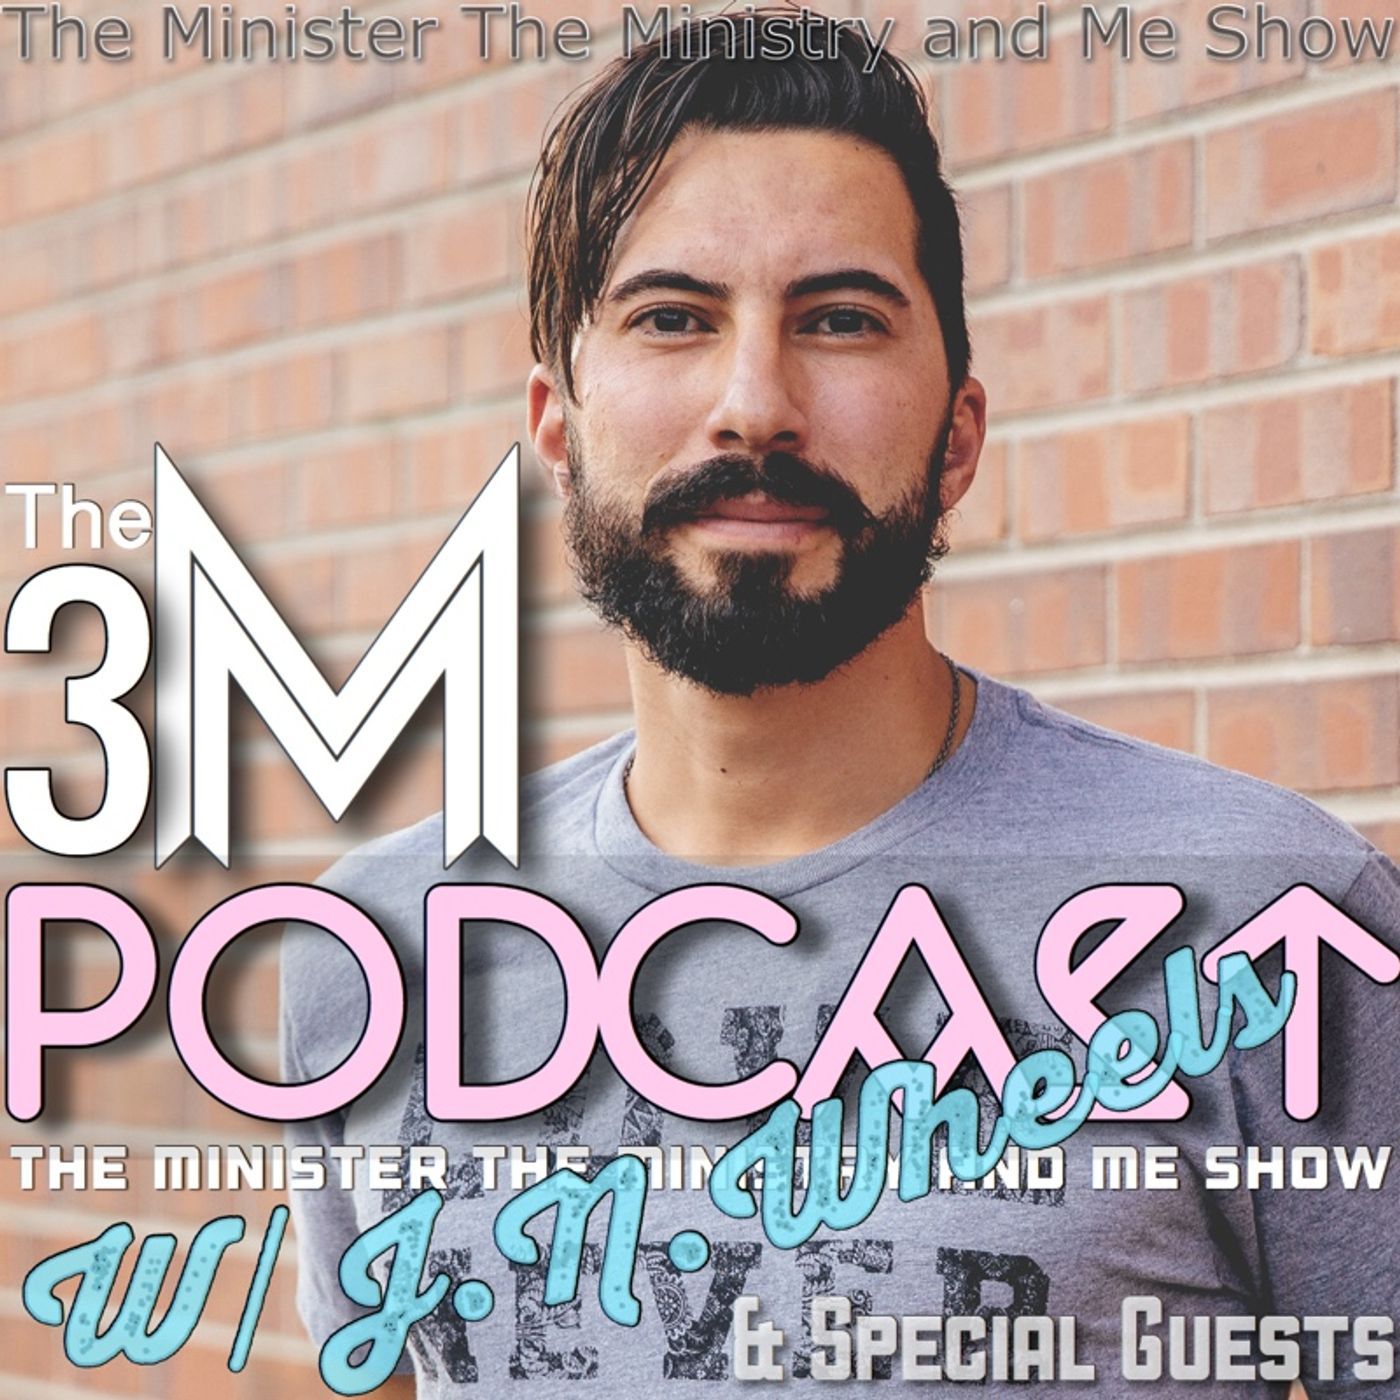 The Minister The Ministry & Me Show – The 3M Podcast